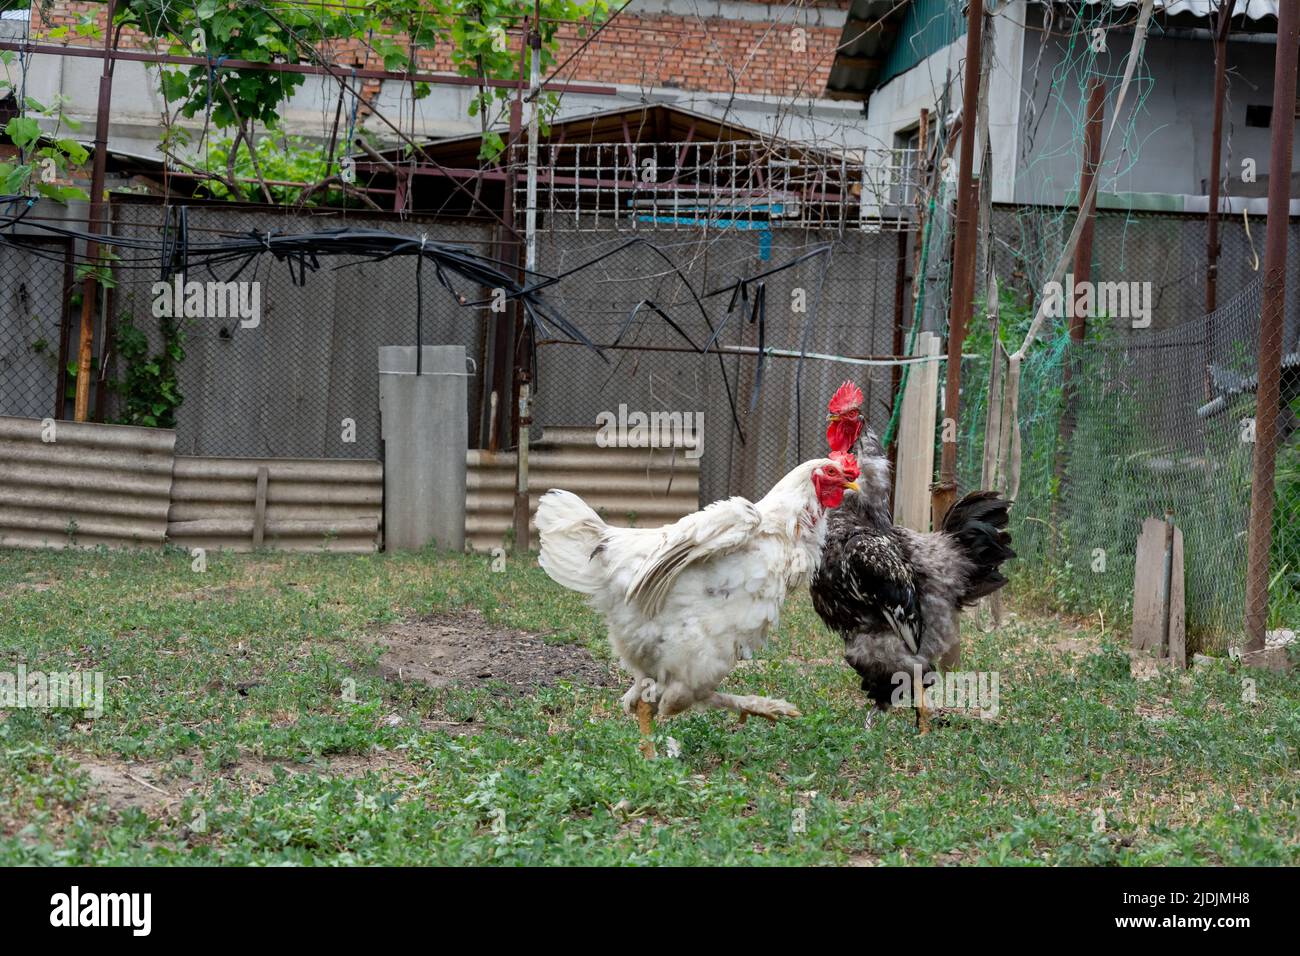 Rooster and young rooster free range. Focus on black and white rooster. Young white rooster spread its wings demonstrating superiority Stock Photo